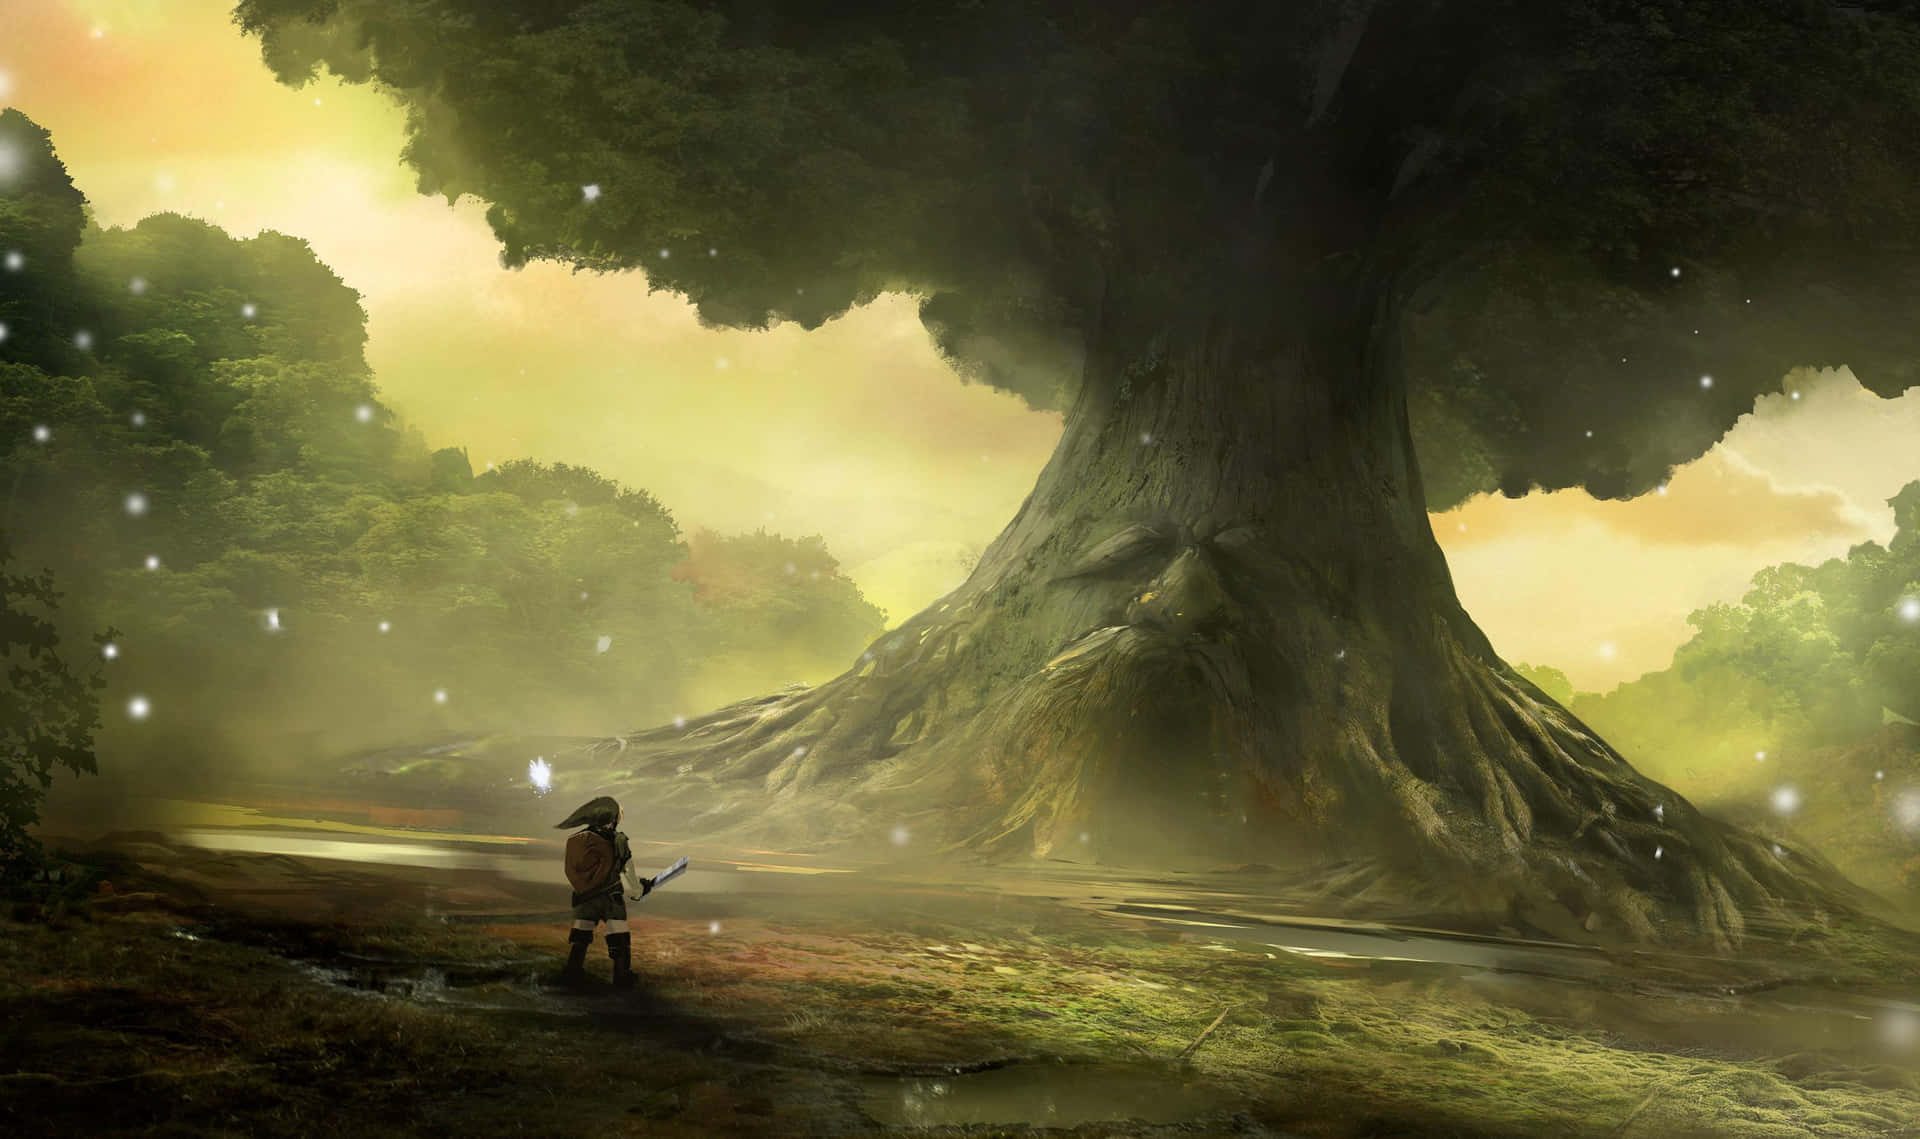 Explore the world of Hyrule in the acclaimed Legend Of Zelda series.